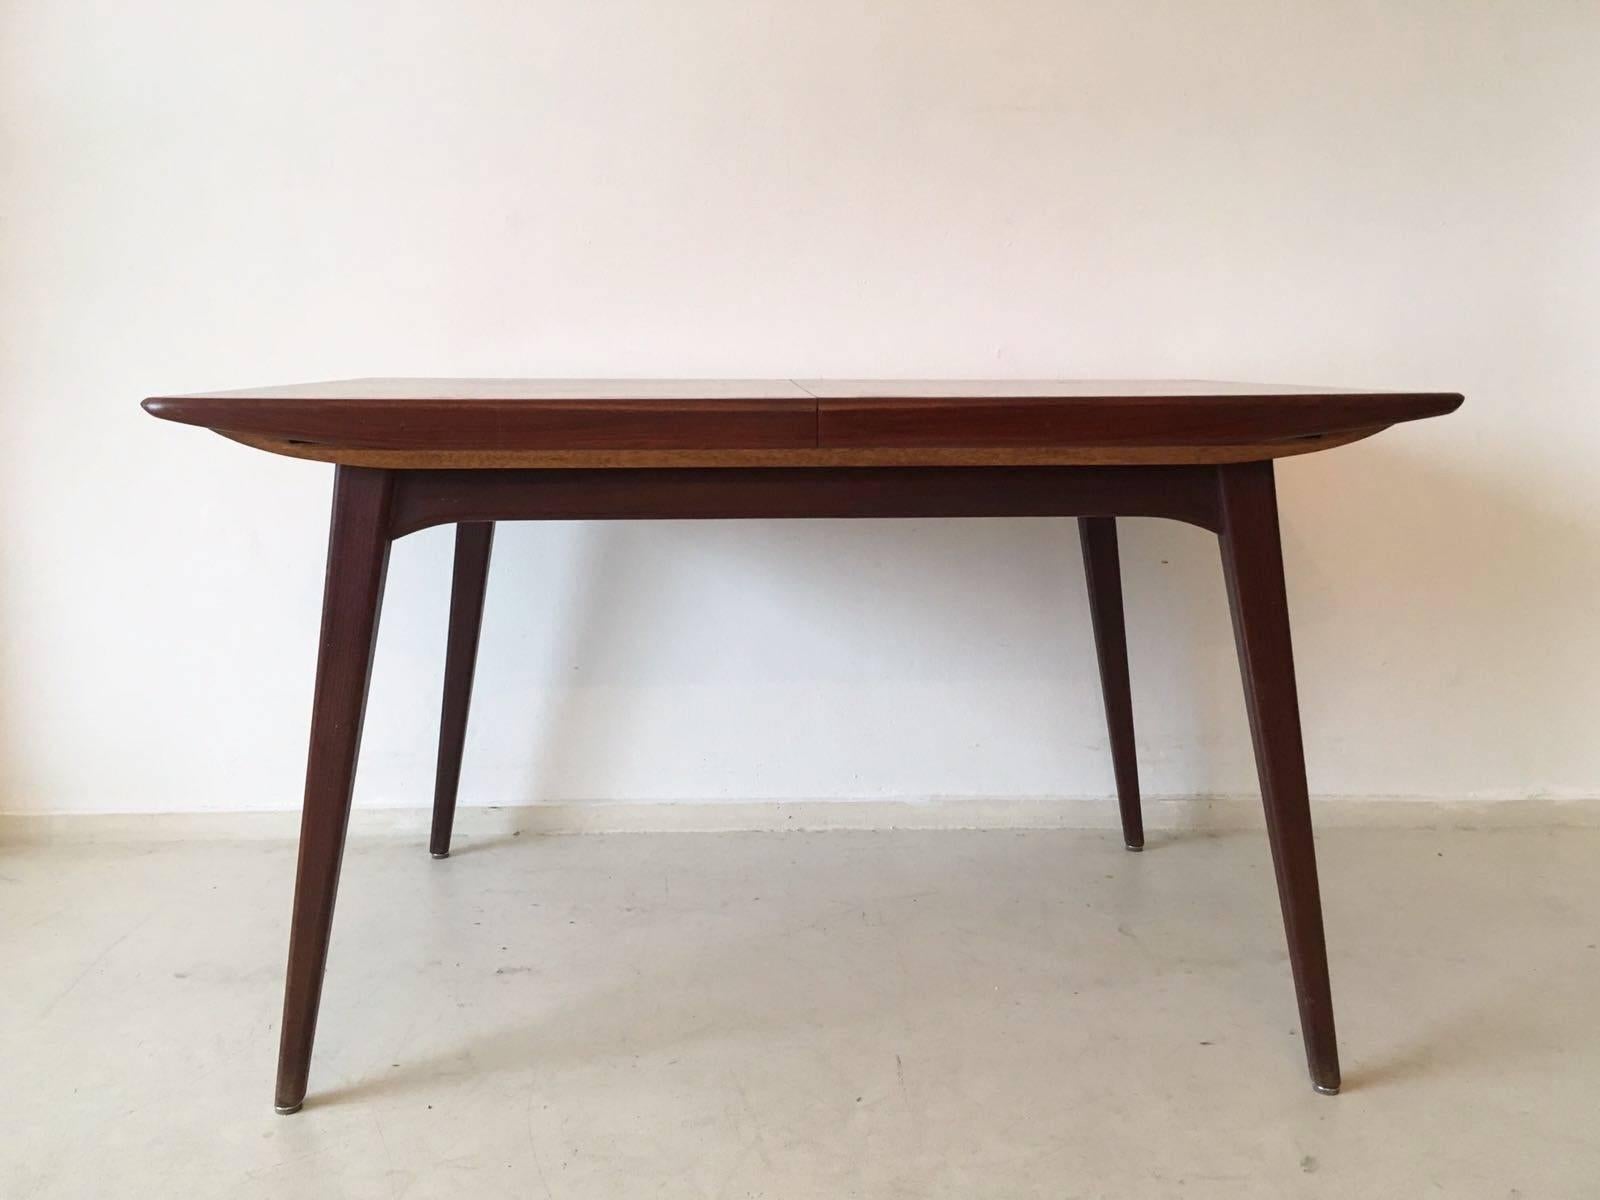 This beautiful Dutch design dining table was manufactured in the Netherlands, circa 1960s. It features a body and legs made from teak. The table remains in a very good condition, with some signs of age and use (see images). Measures: Extendable to